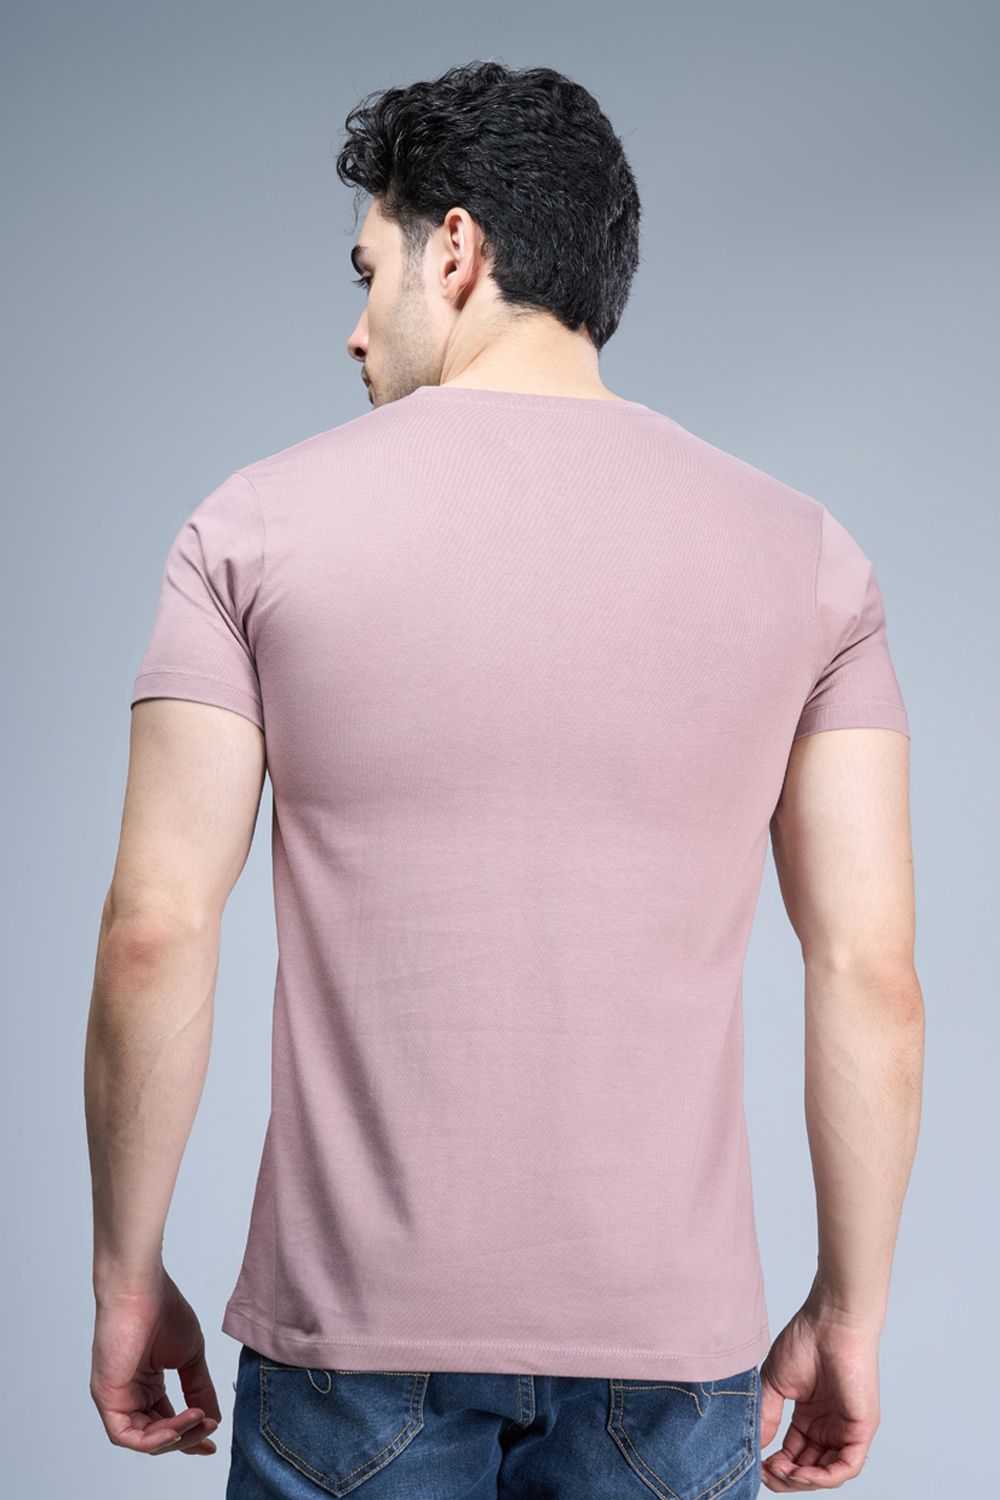 Dark Rust colored, cotton Graphic T shirt for men, half sleeves and round neck, back view.